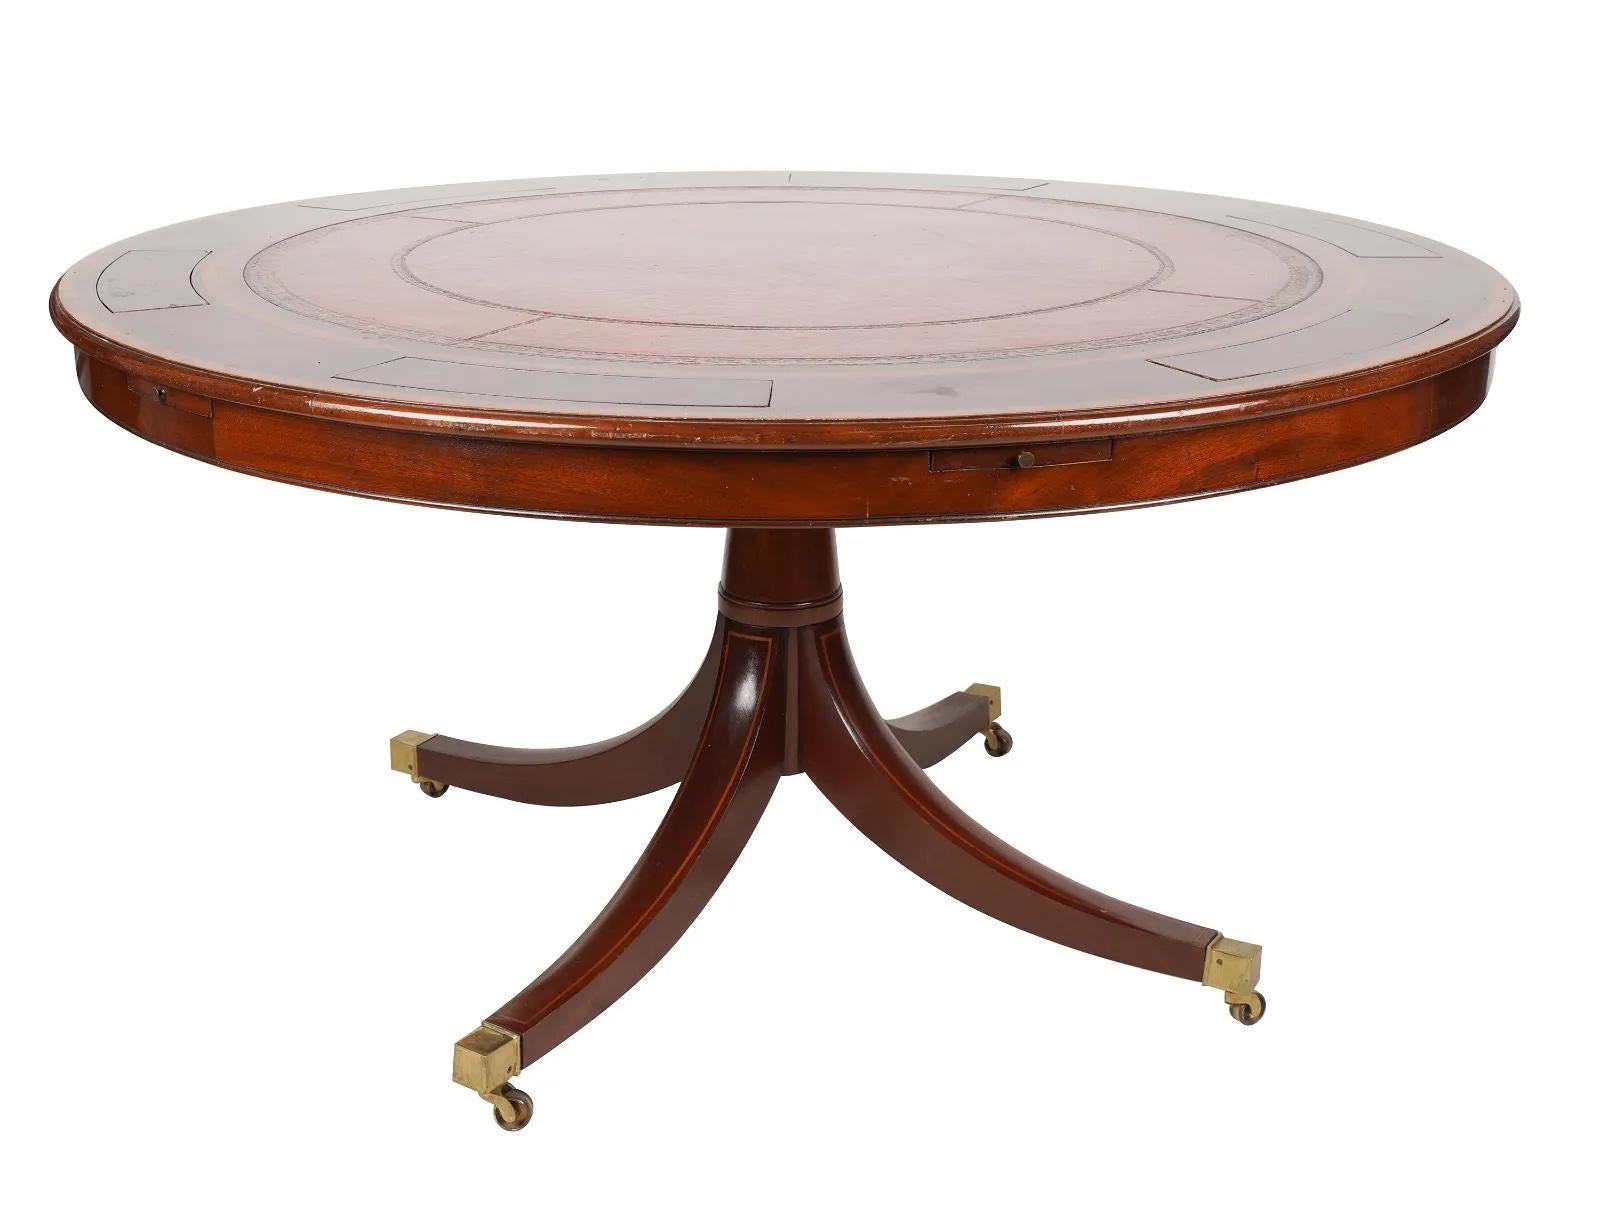 Late 20th Century English Regency Mahogany Poker Table with a gilt tooled burgundy leather inset top; 6 sliding drink holders and 6 game piece compartments; rising on 4 out swept legs terminating with brass casters. 

Provenance: Purchased from the